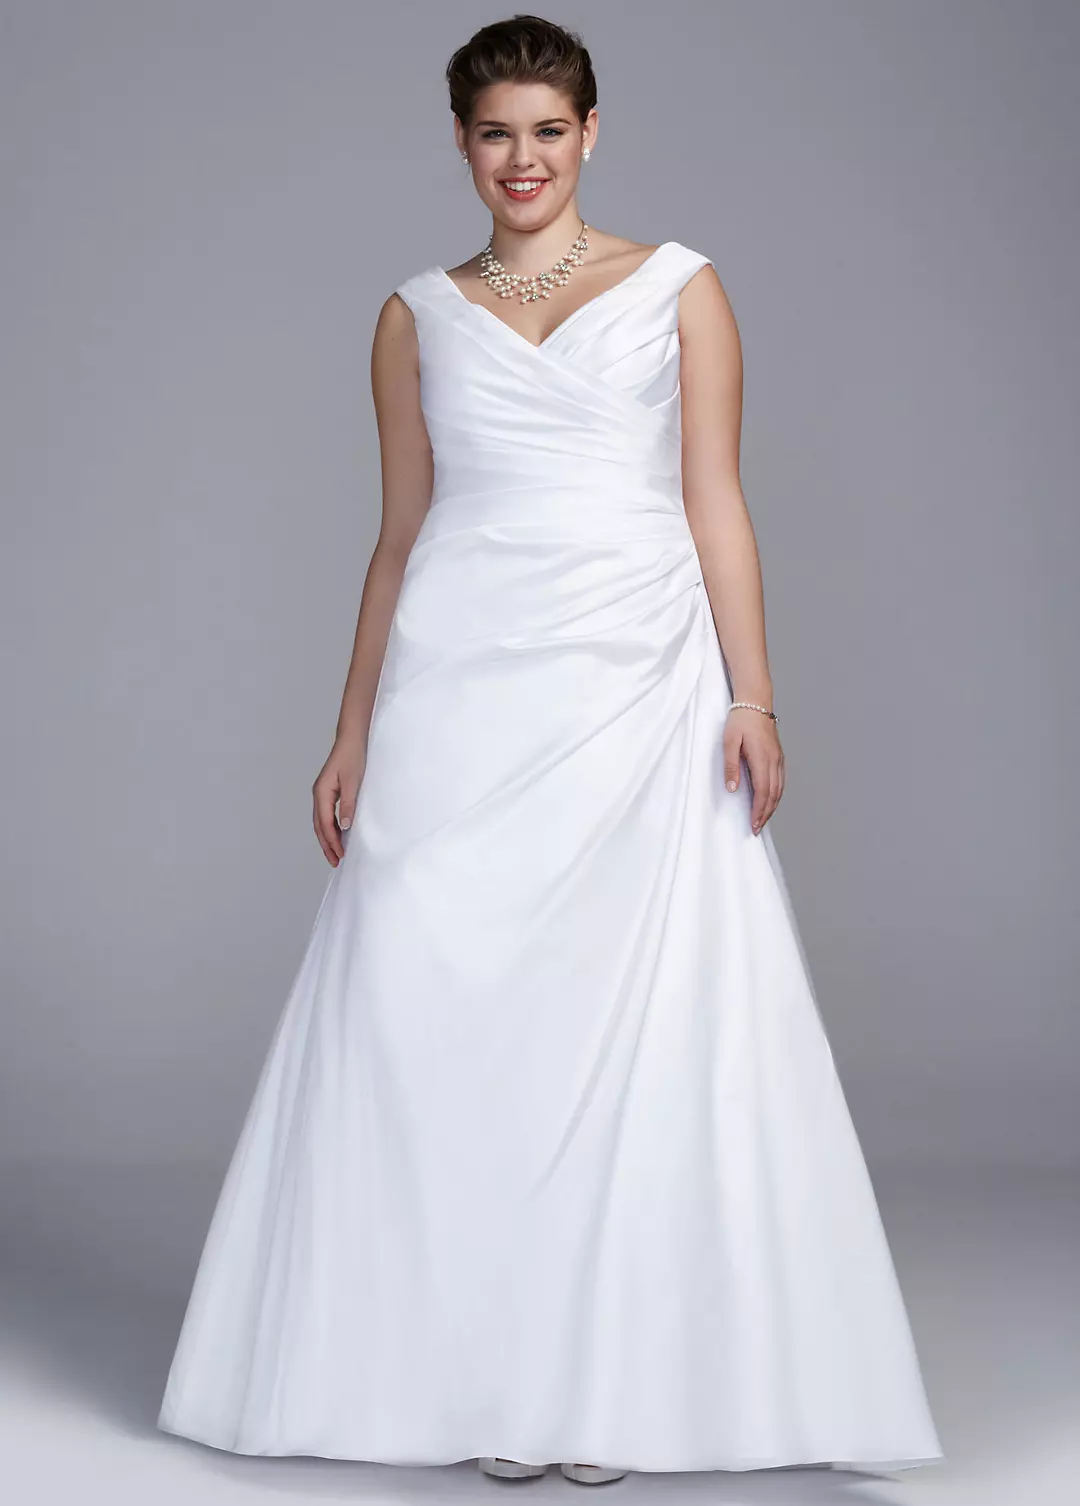 Extra Length A-Line with Side-Draped Bodice  Image 2